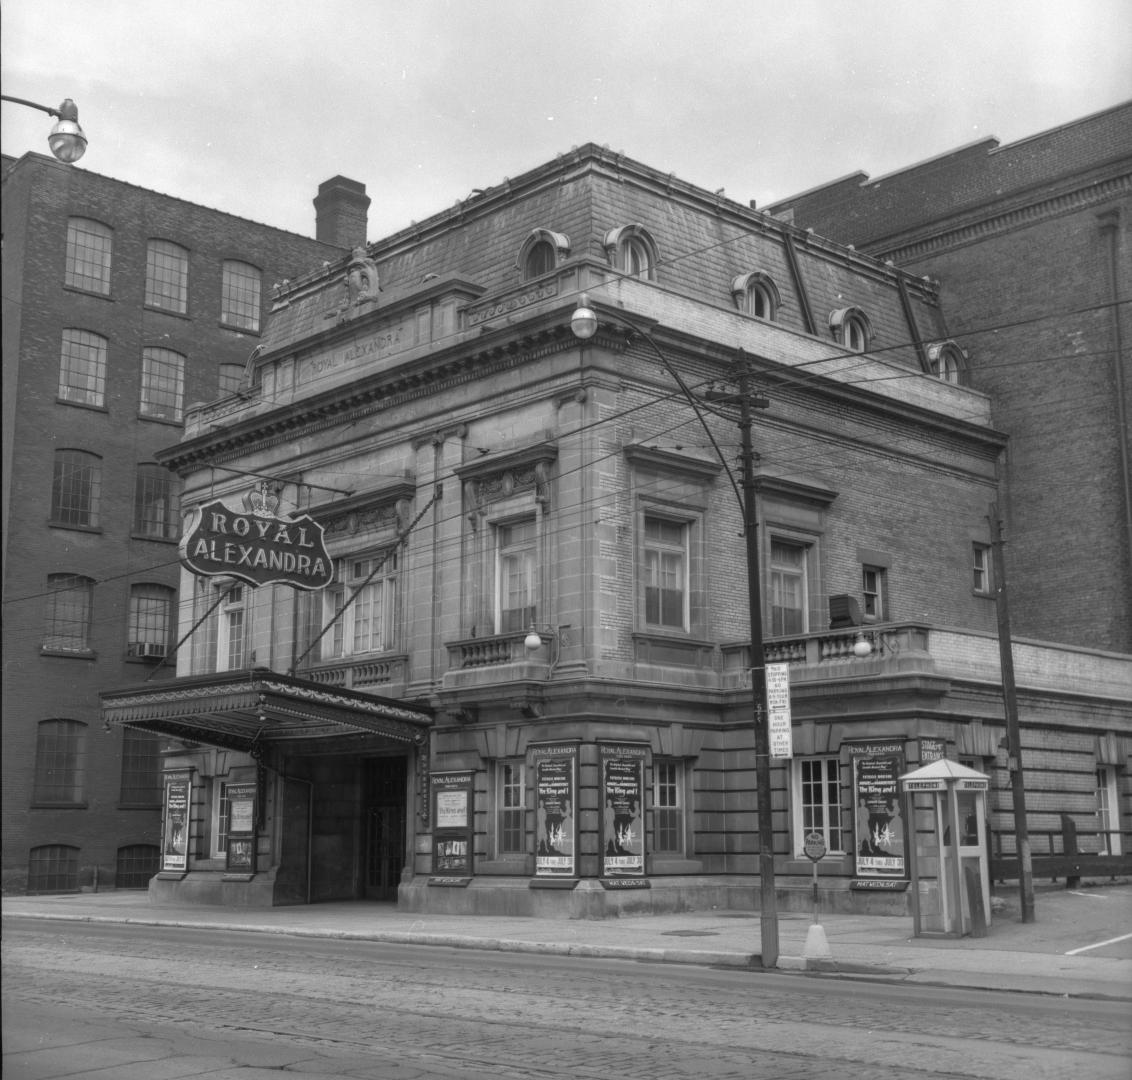 Royal Alexandra Theatre, King Street West, north side, east of Duncan St